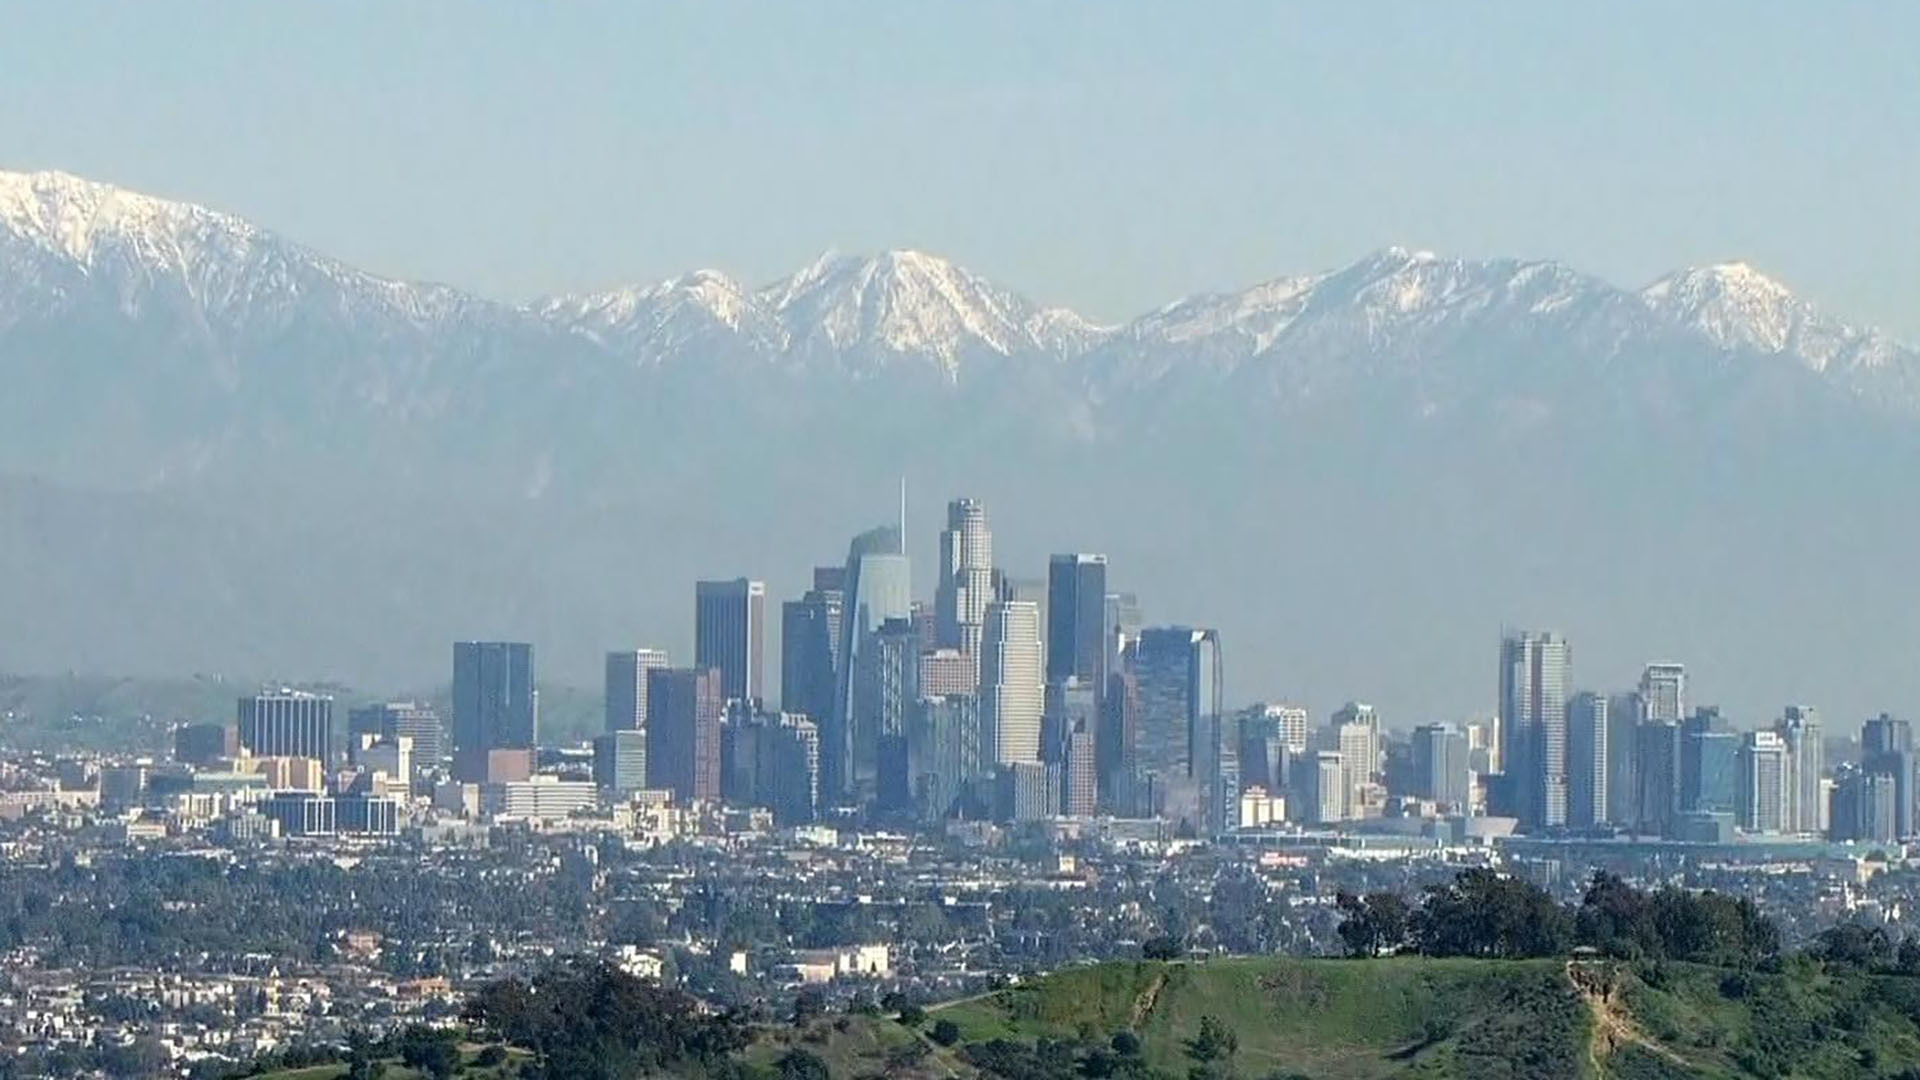 Americans Are Fleeing Los Angeles More Than Anywhere Else for